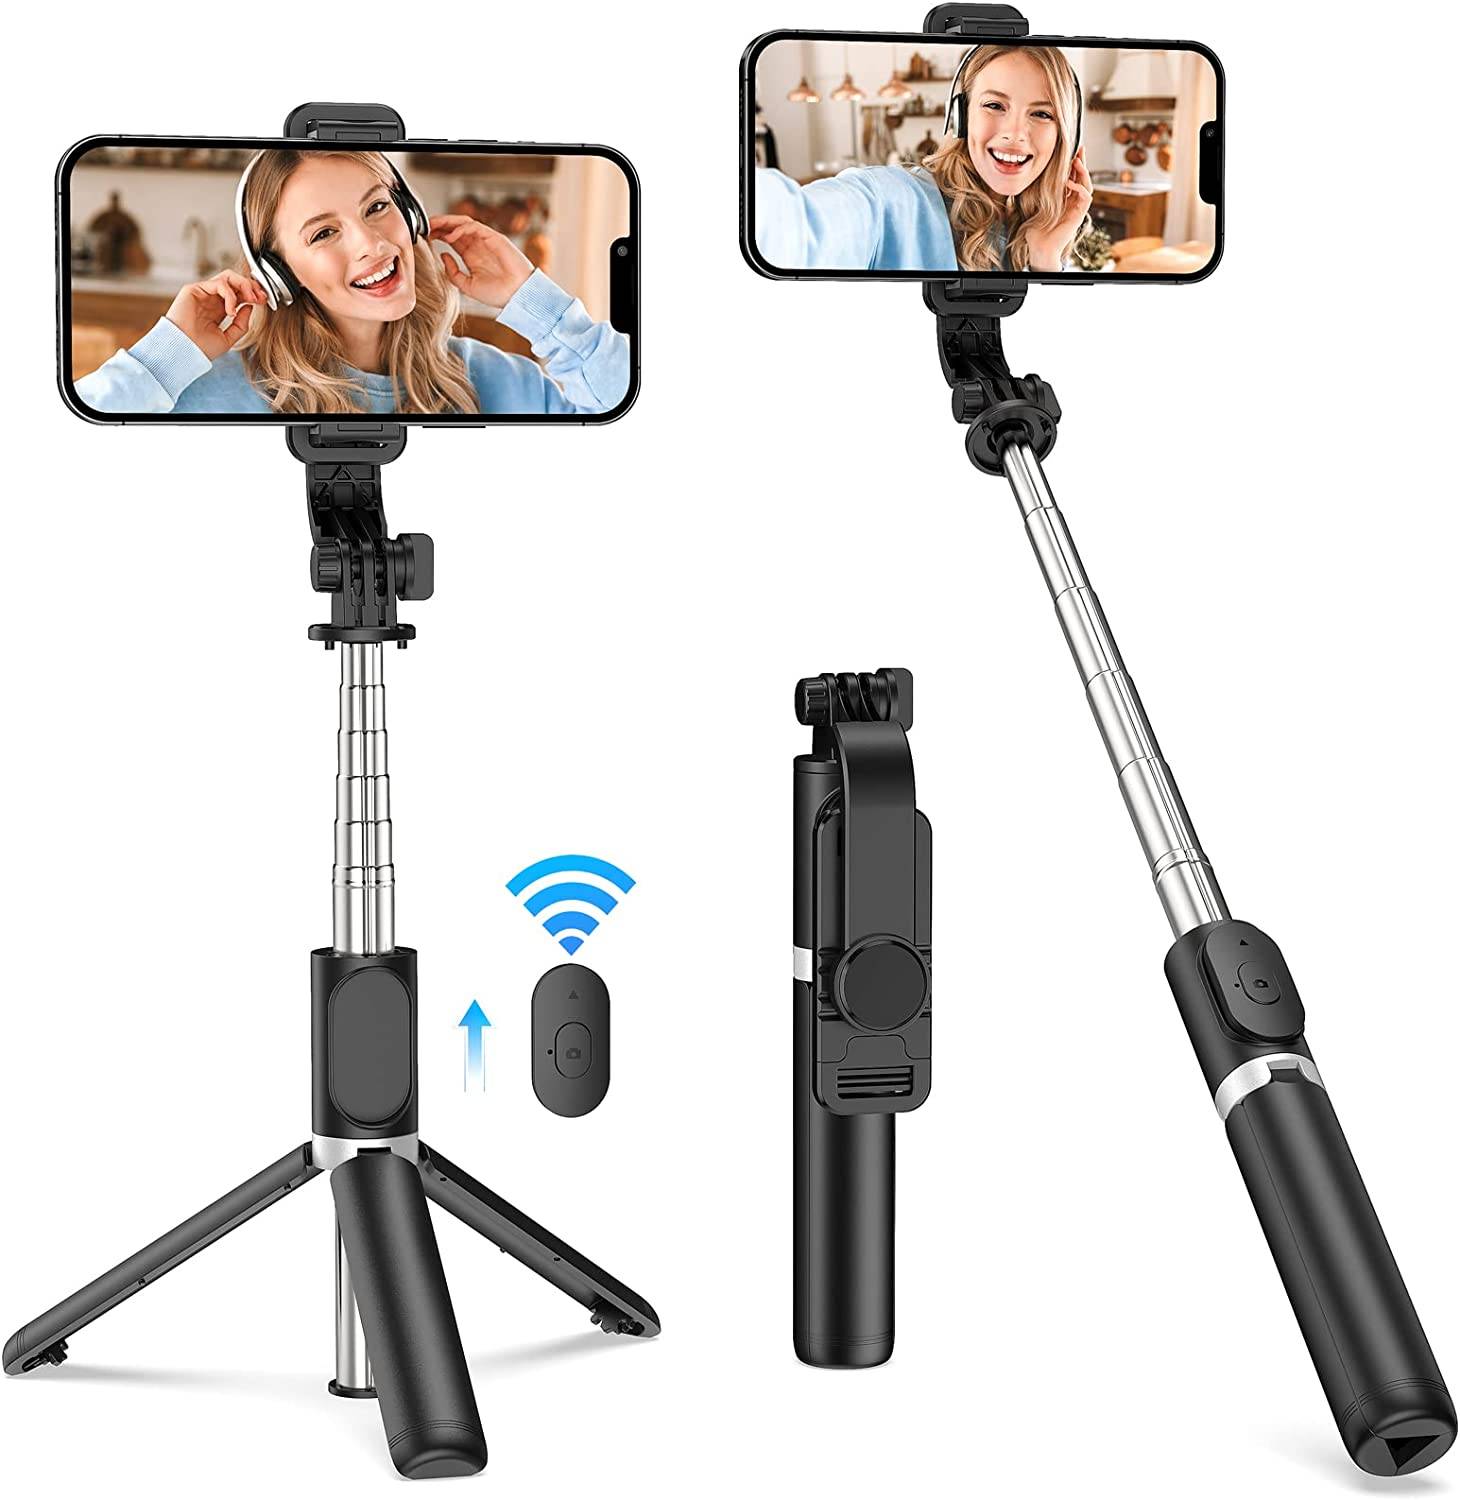 1. Multi-angle shot with vertical shooting at 90 degrees. This smartphone tripod helps to capture clean shots from any angle even in the move.
2. Compatible for iPhone Android smartphones.
3. Table tripod, ground top tripod and selfie stick function. The ball head makes positioning and straightening devices easy.
4. Height adjustable from 11 inch to 39.4 inch.
5. Bluetooth shutter release. Range: 33ft.